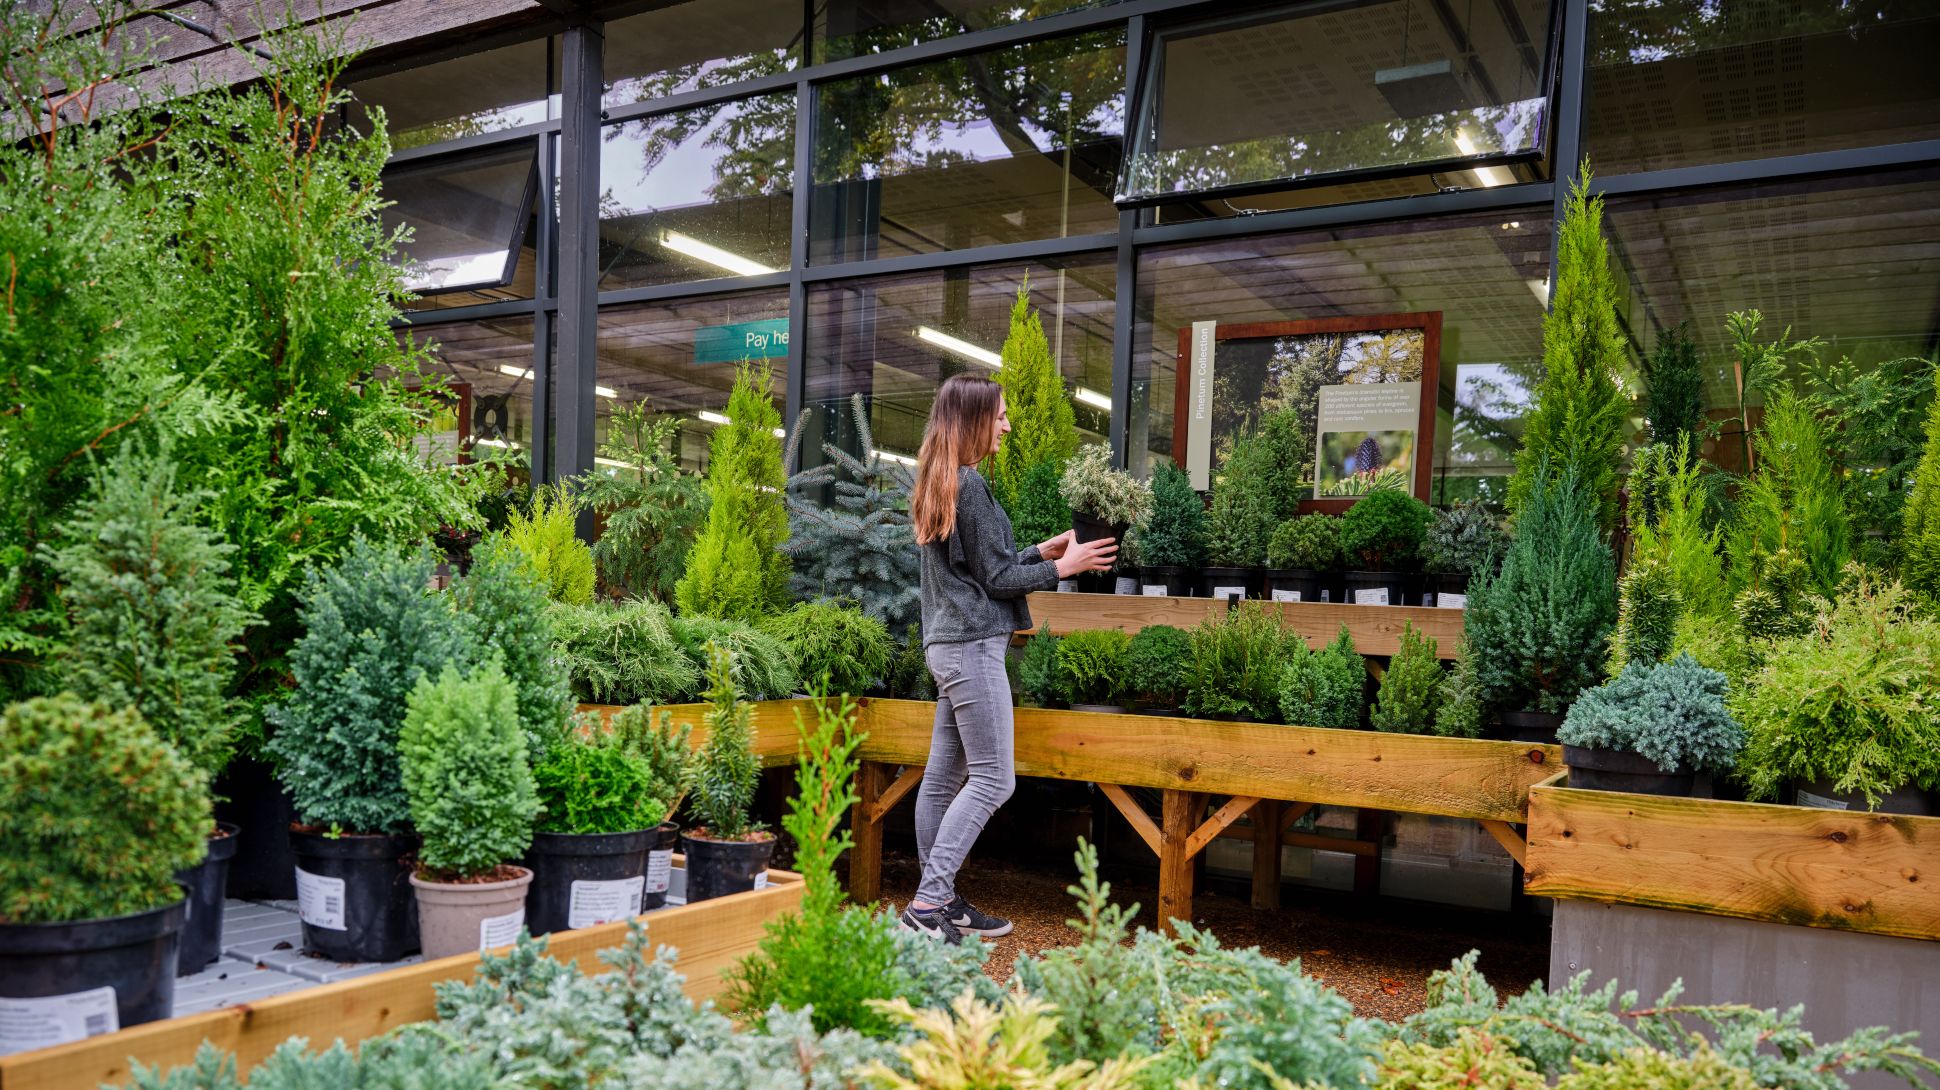 A person looks at evergreen plants for sale on benches